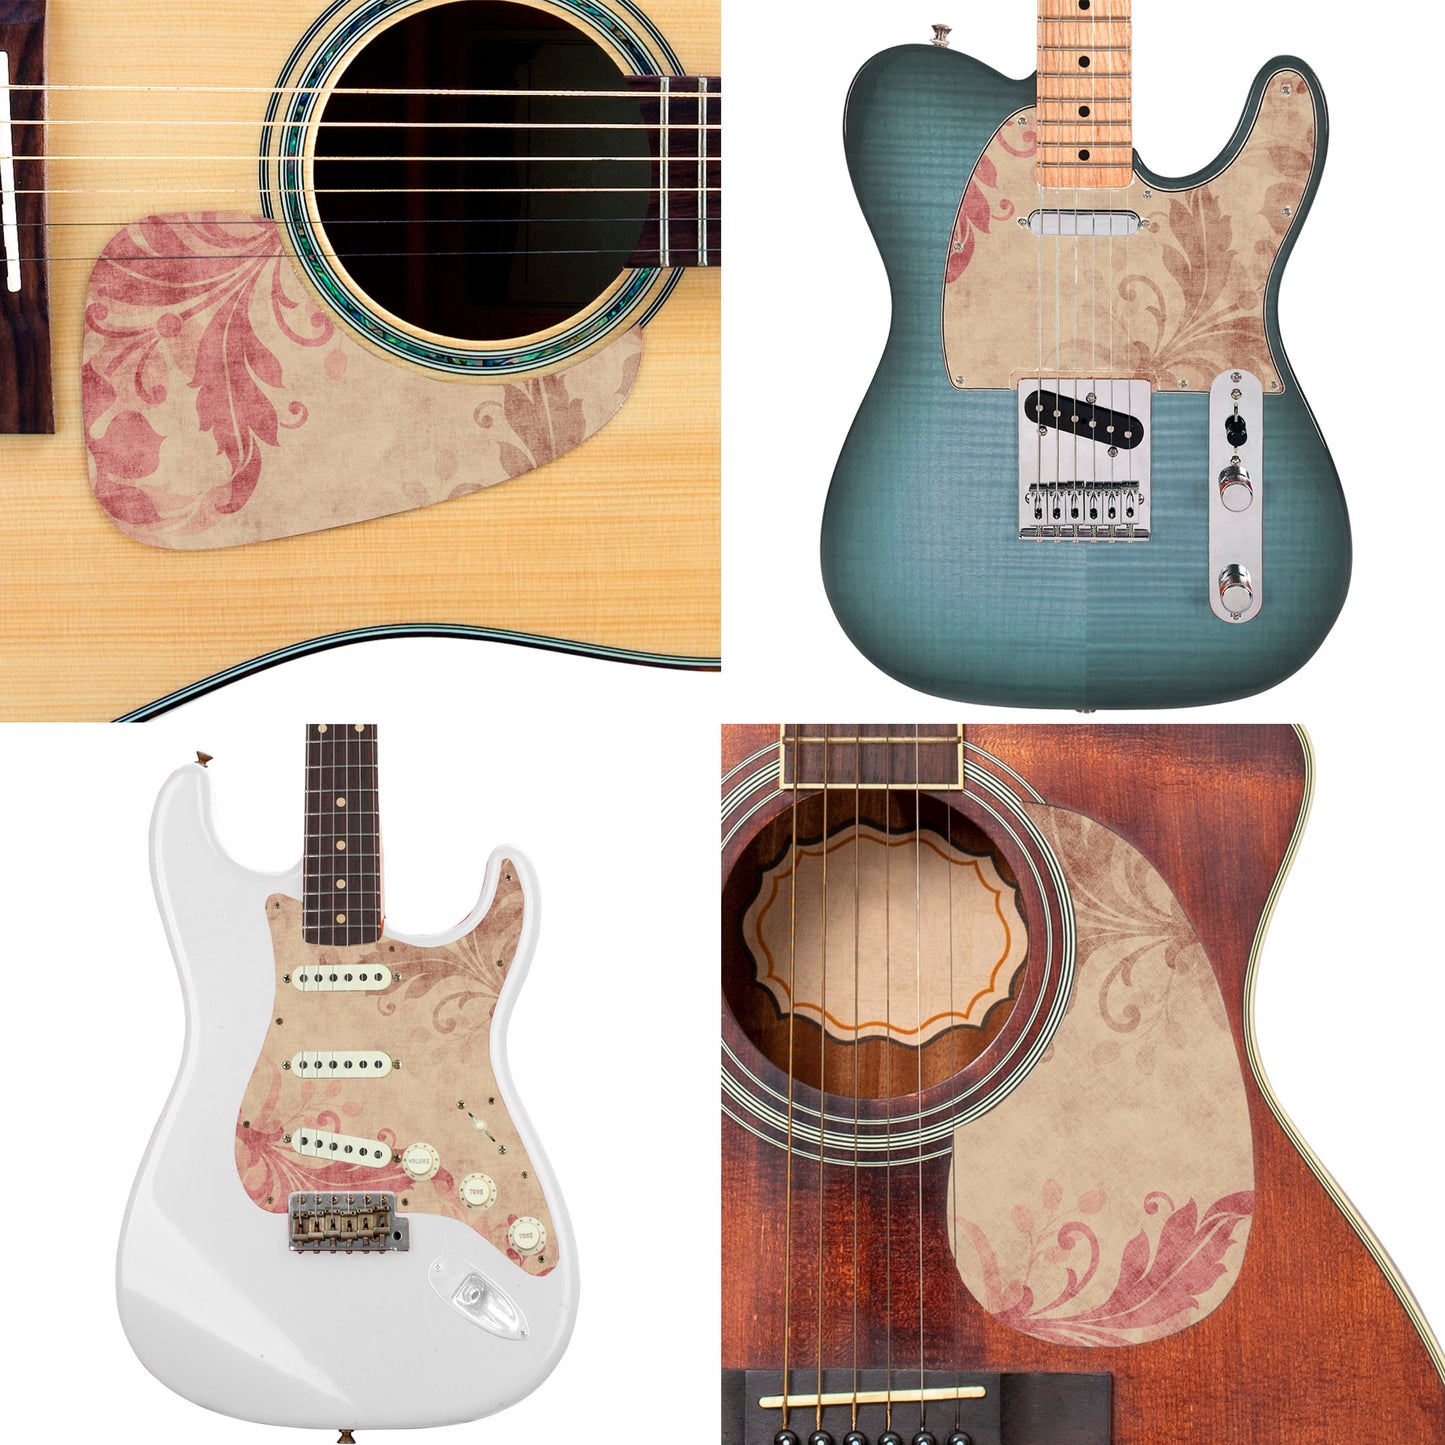 Guitar Custom PickGuard Sticker Skins. Customise your own existing Pickguard, Headstock, Tremolo Cover plate. 4 options, The Quilted Patches